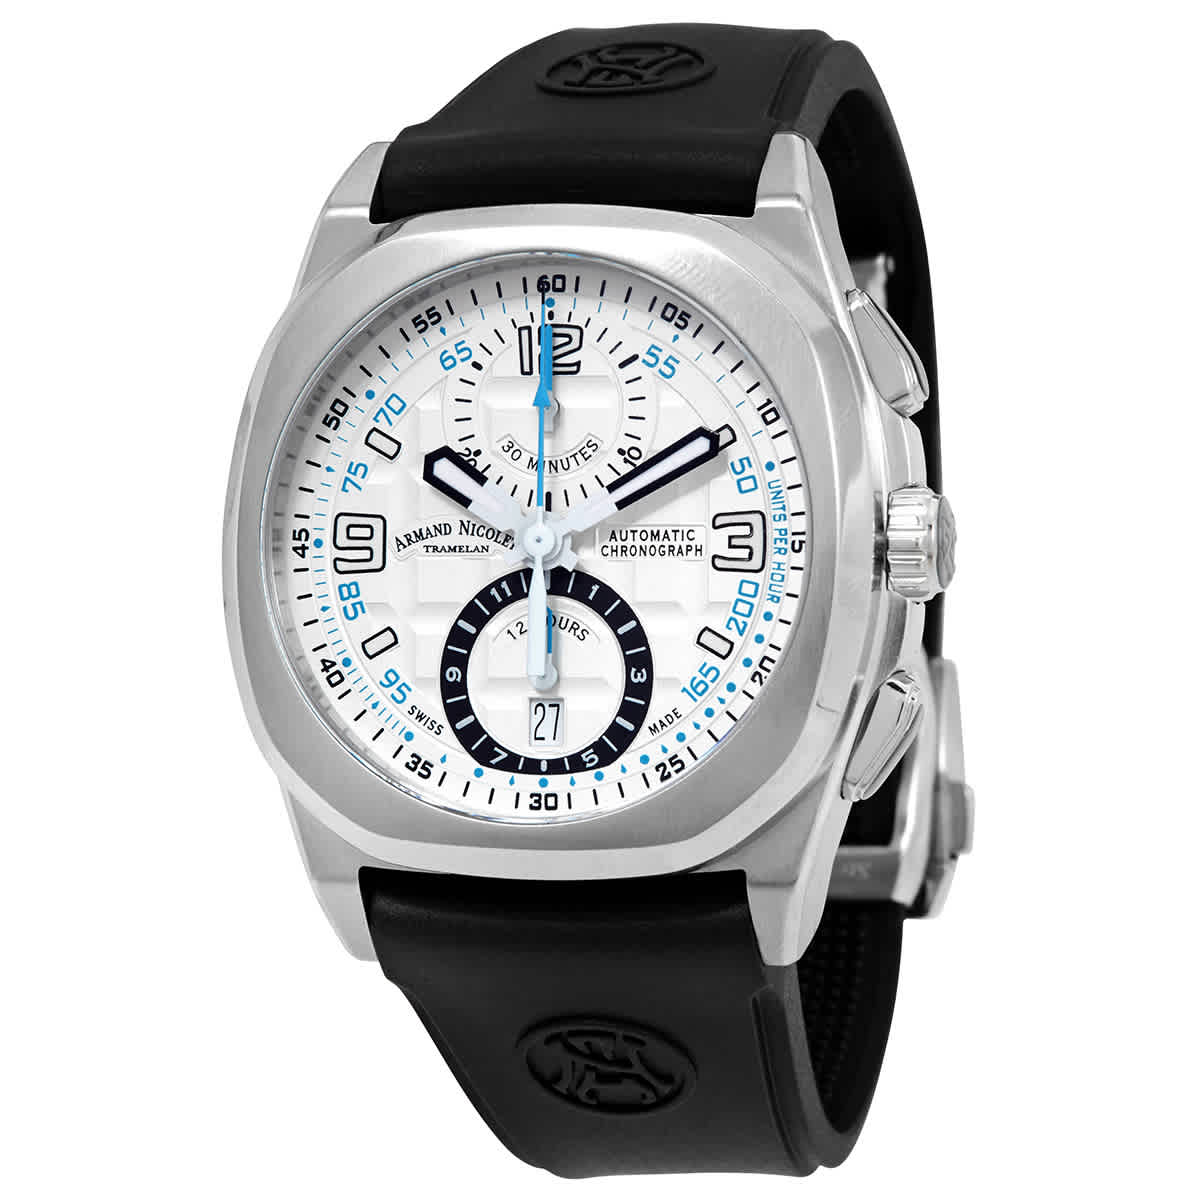 Armand Nicolet Jh9 Chronograph Automatic Silver Dial Mens Watch A668haa-az-gg4710n In Black / Silver